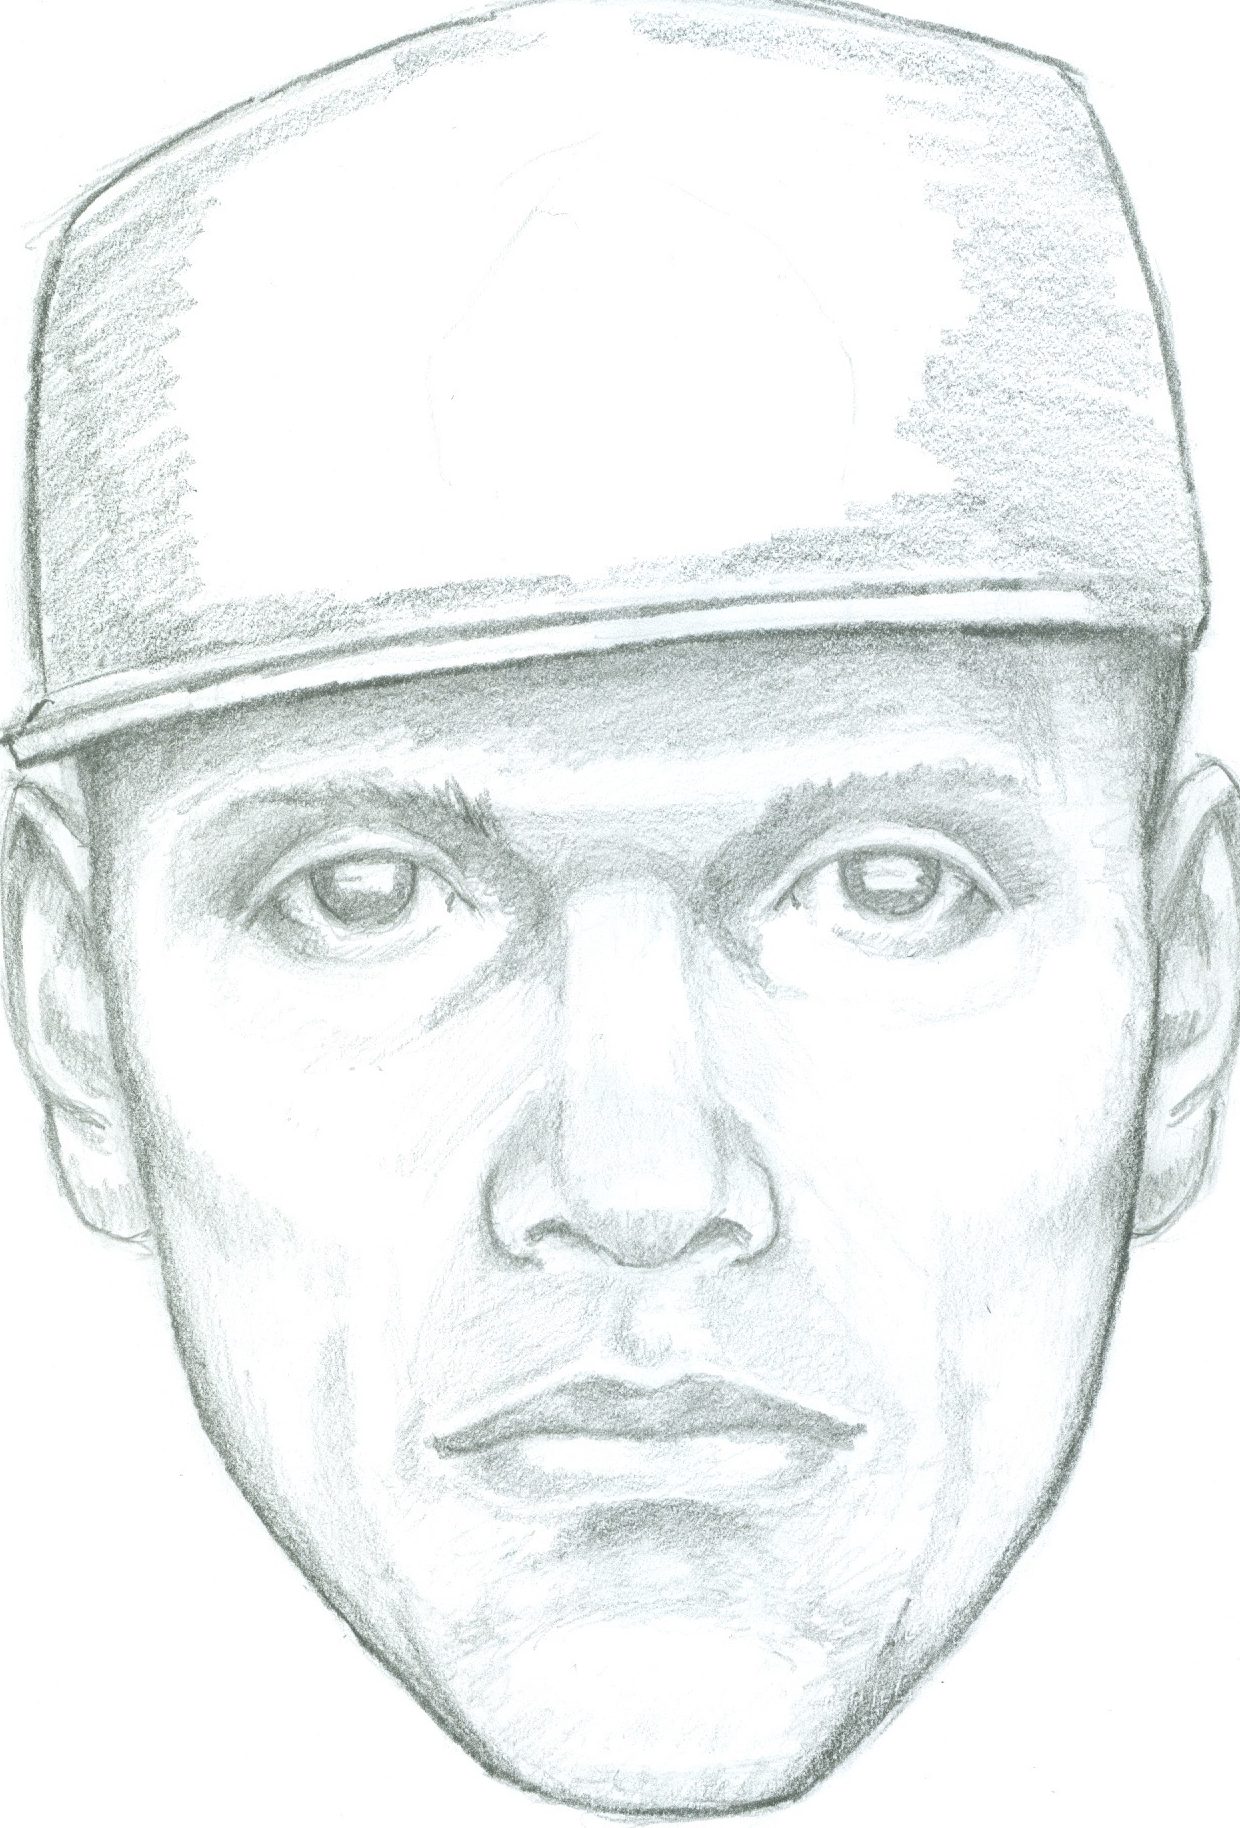 Police release a sketch of a suspect believed to be involved in an assault on July 20th, 2017.